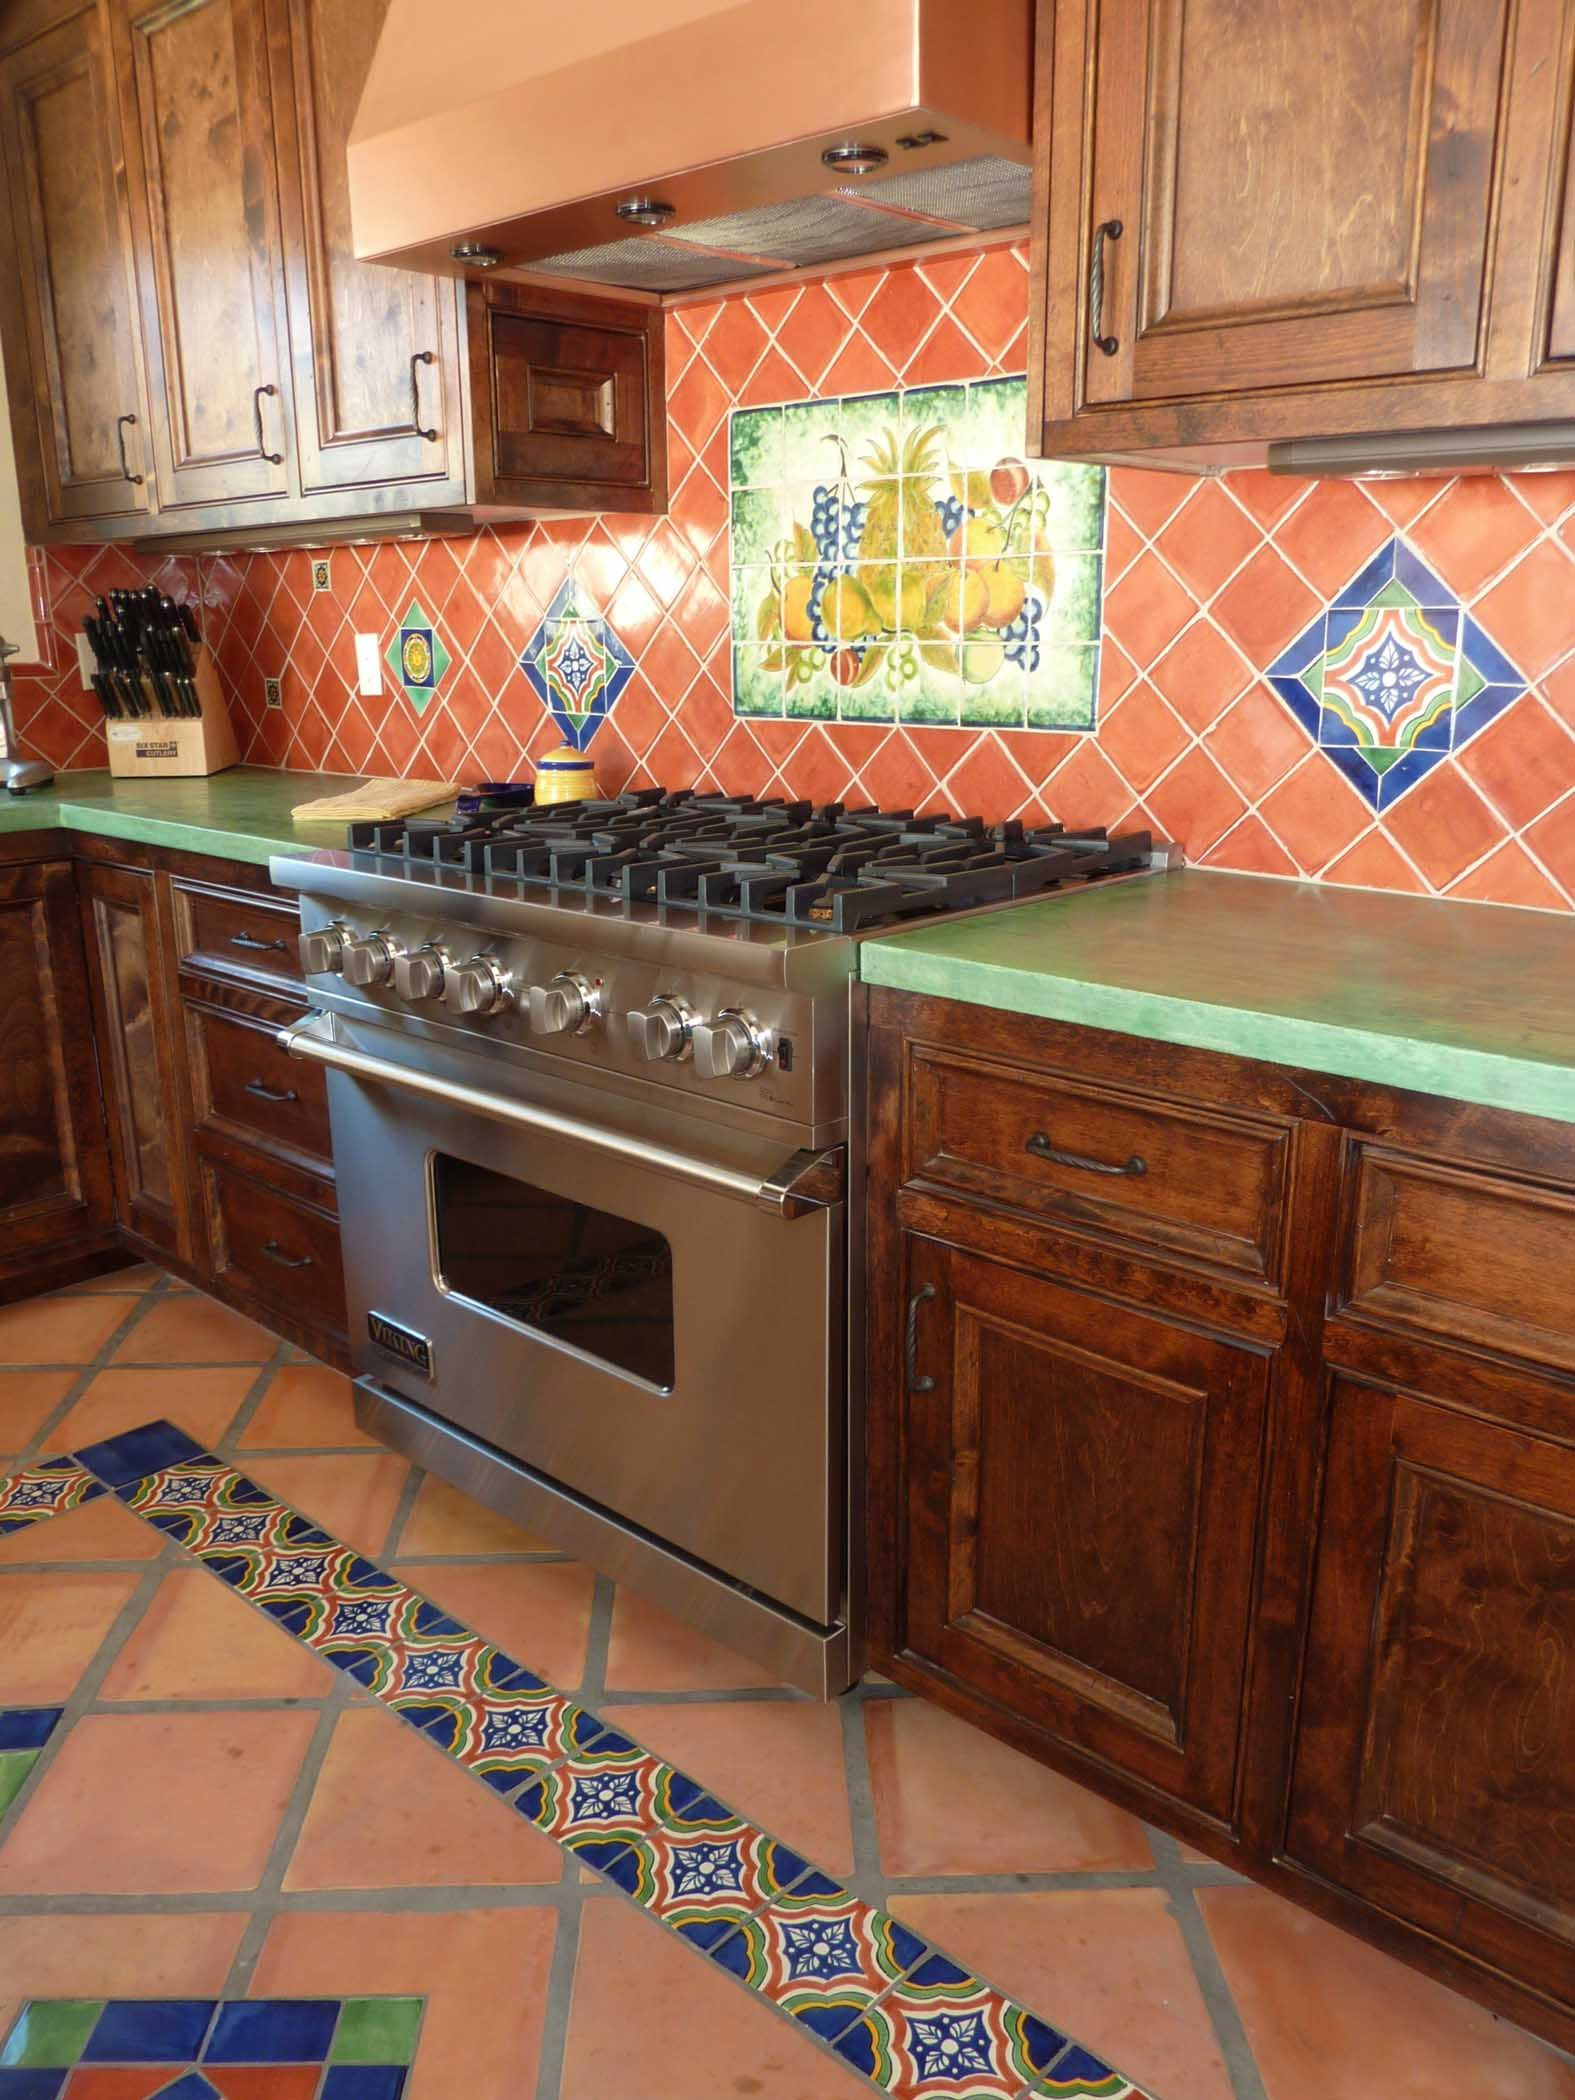 Mexican Tile Kitchen
 Kitchen remodel using Mexican tiles by kristiblackdesigns